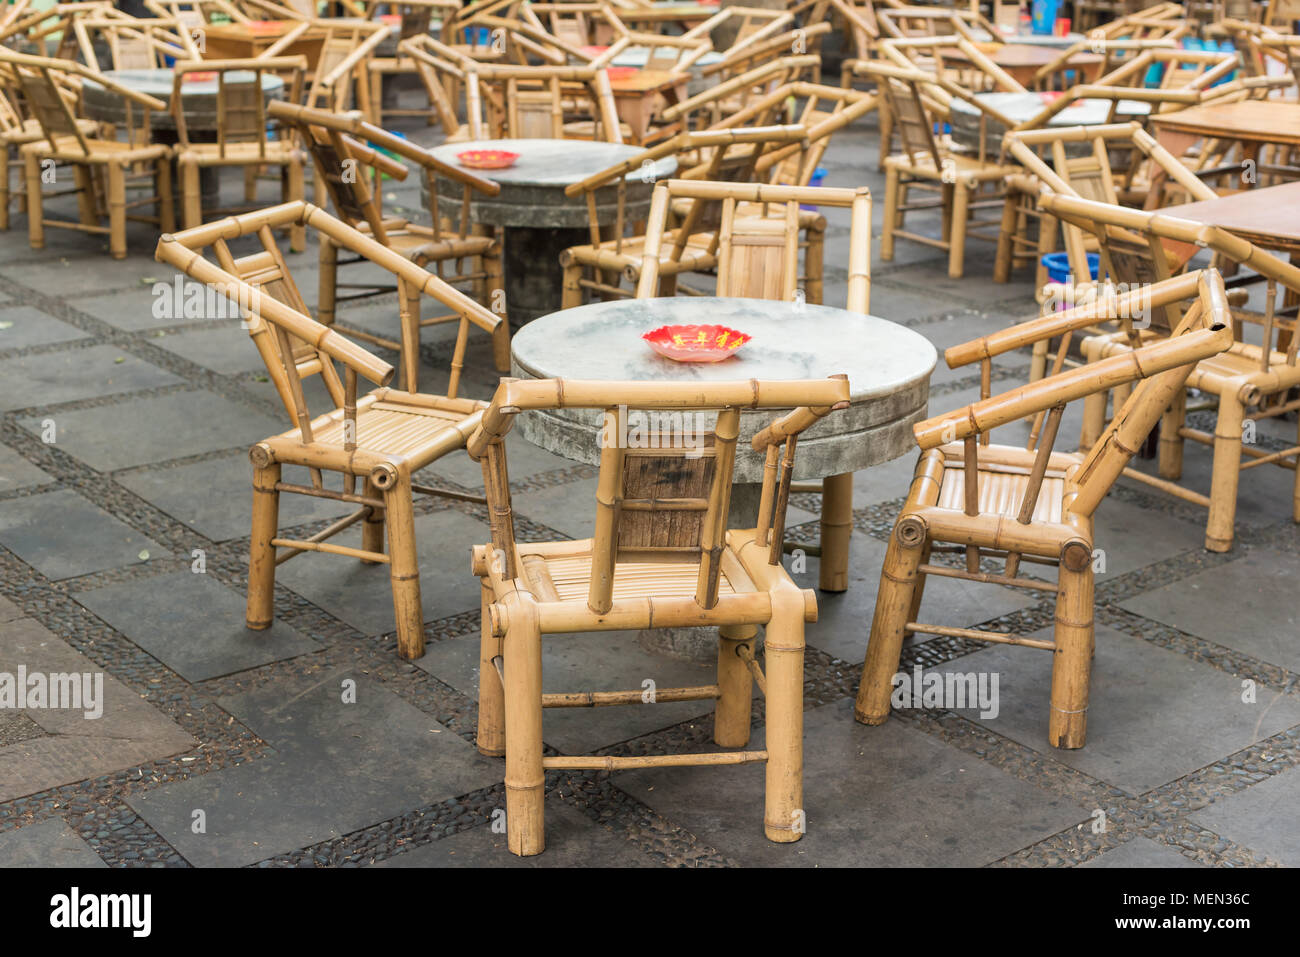 Chengdu, Sichuan Province, China - April 11, 2018 : Empty bamboo chairs and tables in people's park ancient tearoom Stock Photo